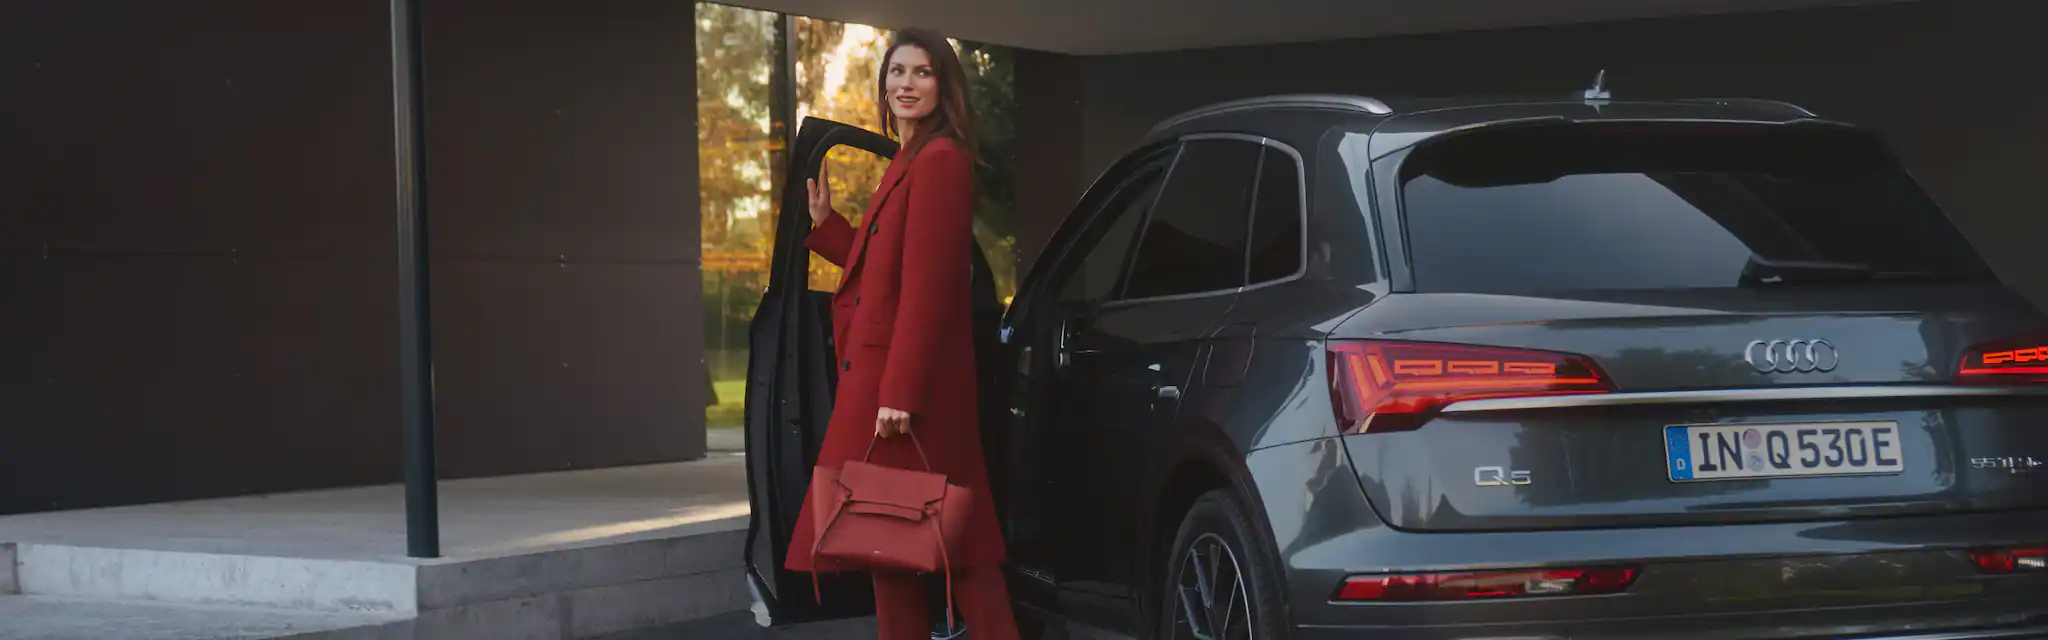 Businesswoman getting out of an Audi Q5